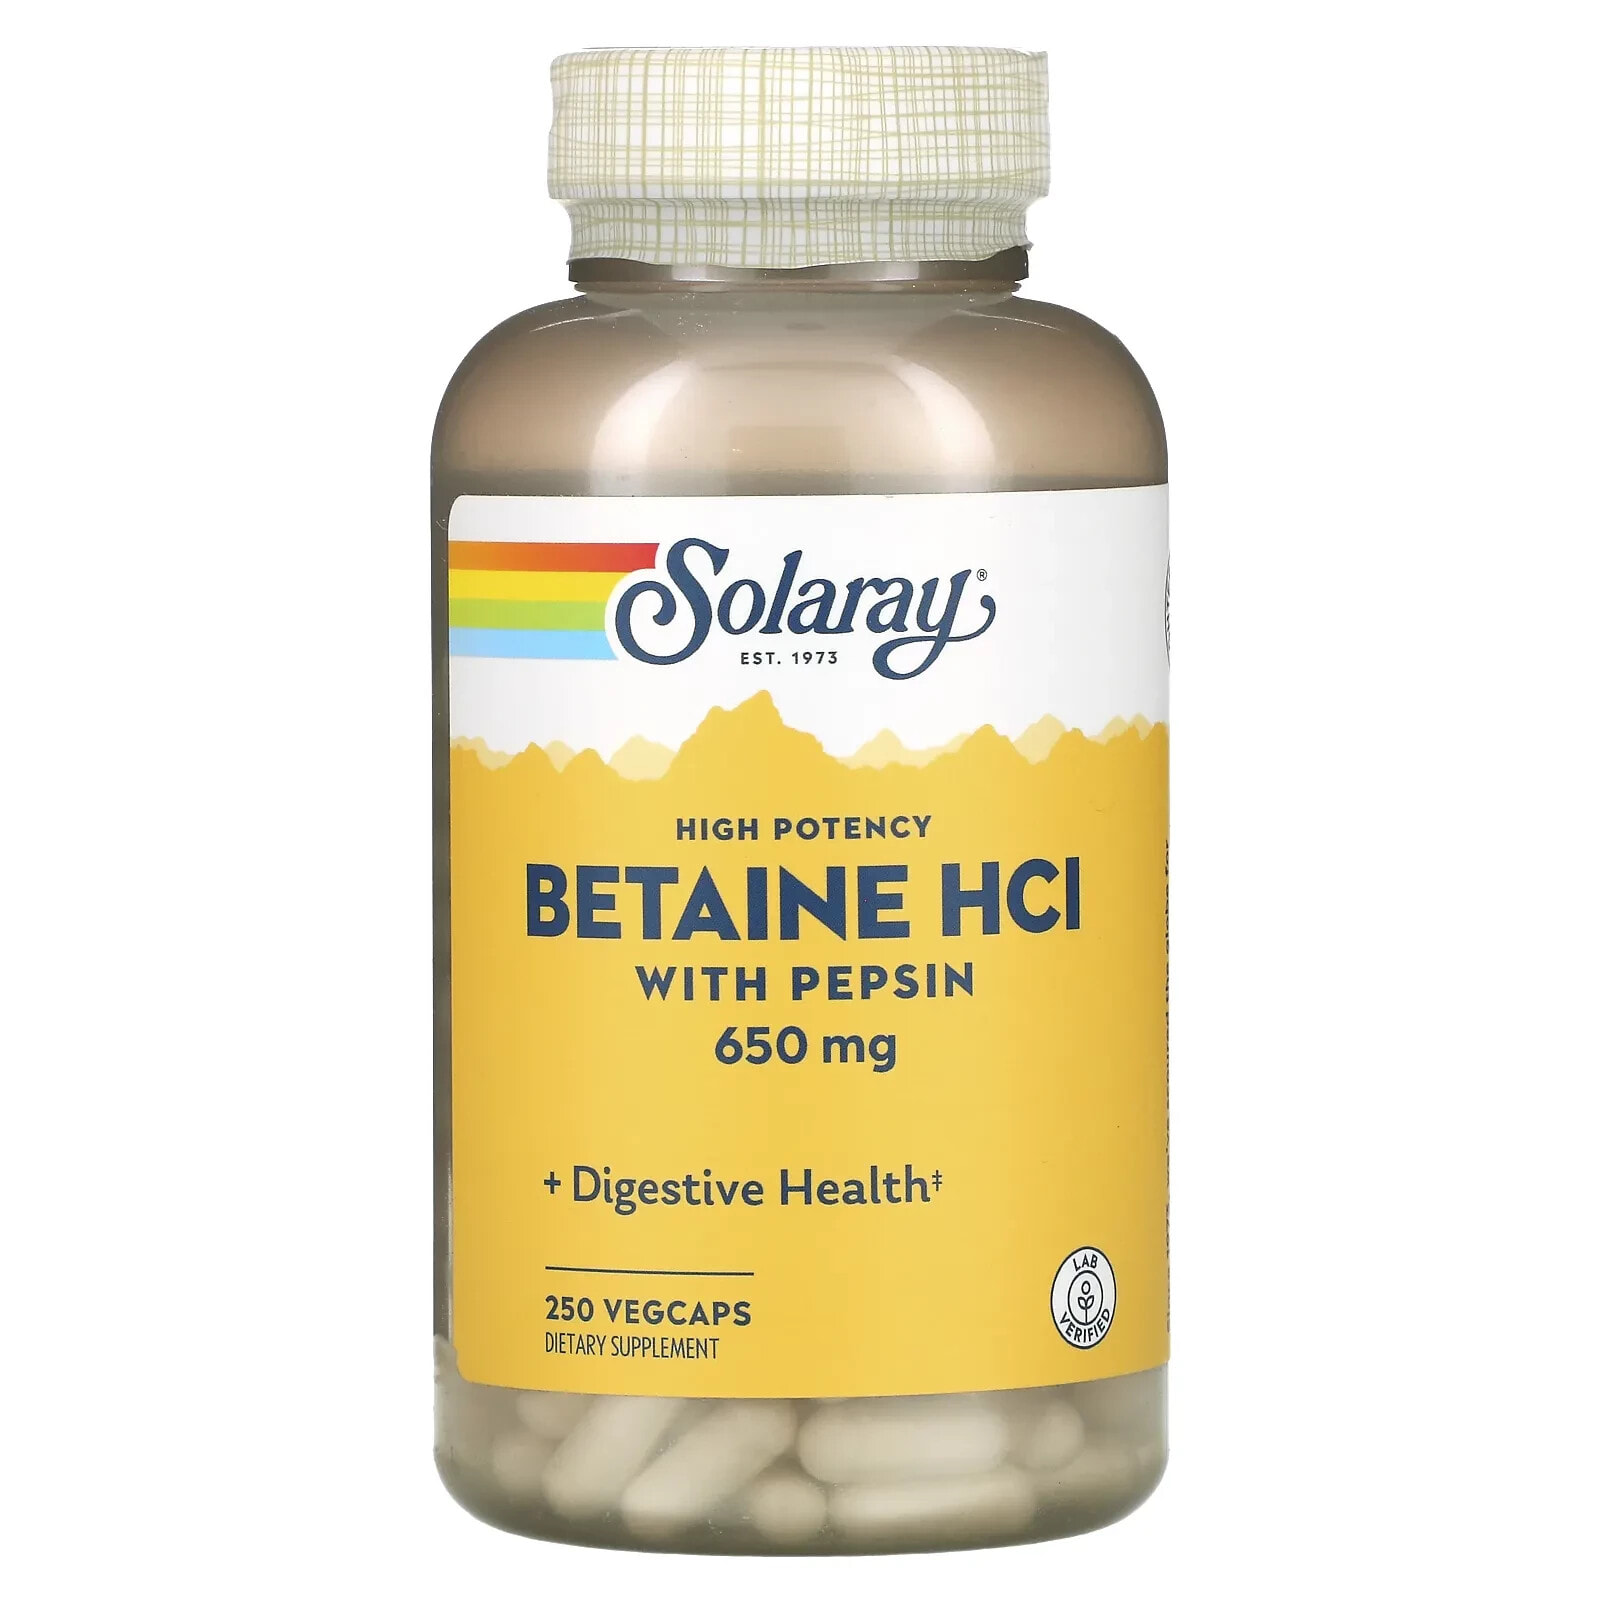 High Potency Betaine HCl with Pepsin, 650 mg, 250 VegCaps